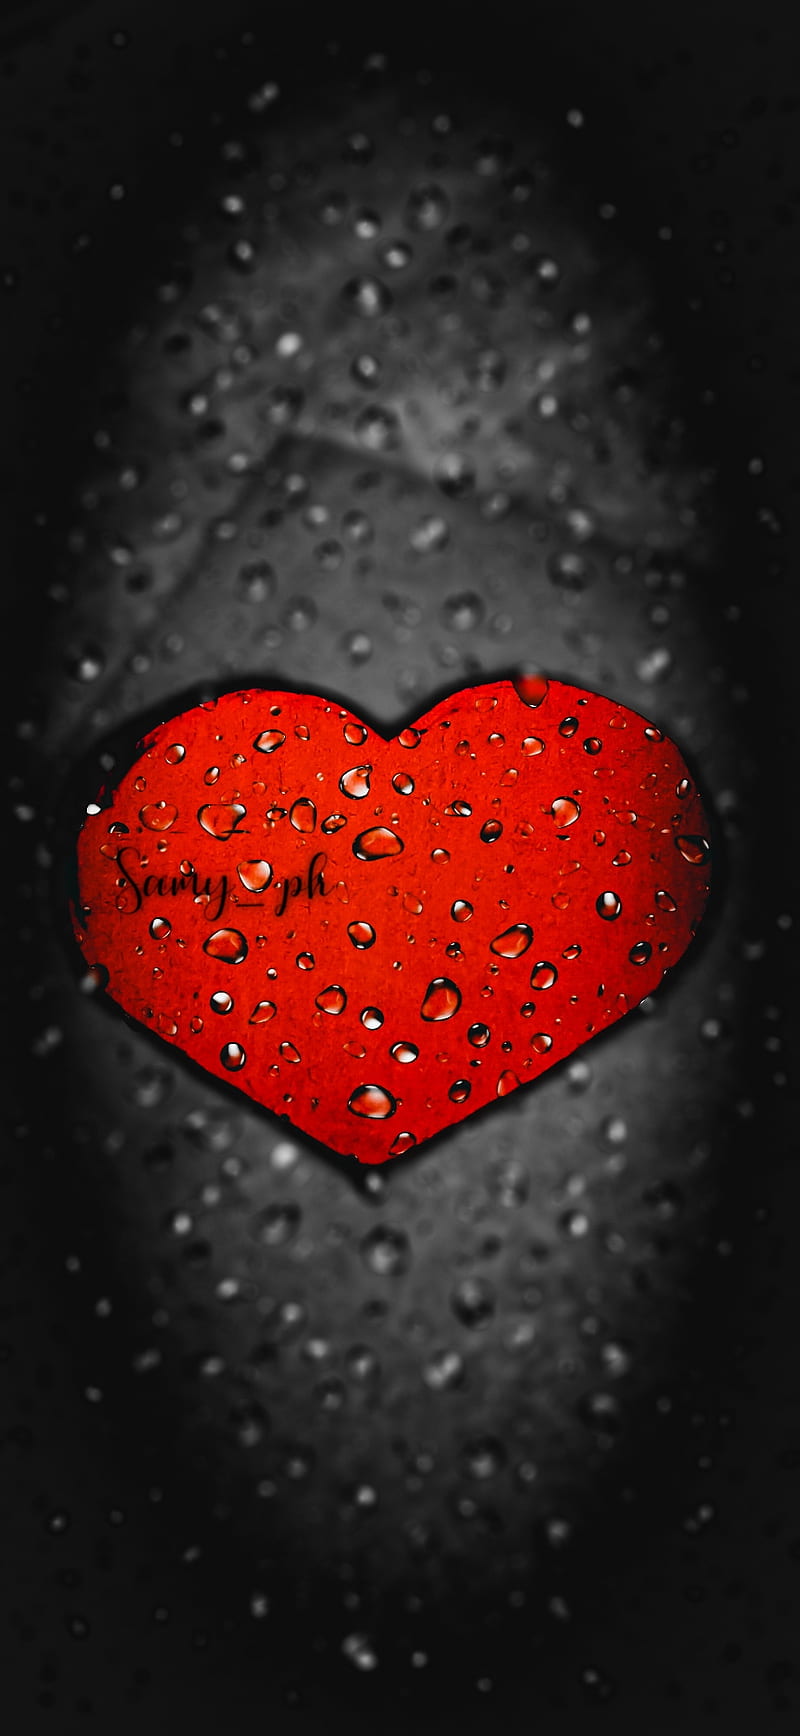 Free Downloadable Red Heart Wallpaper For Phone and Computer